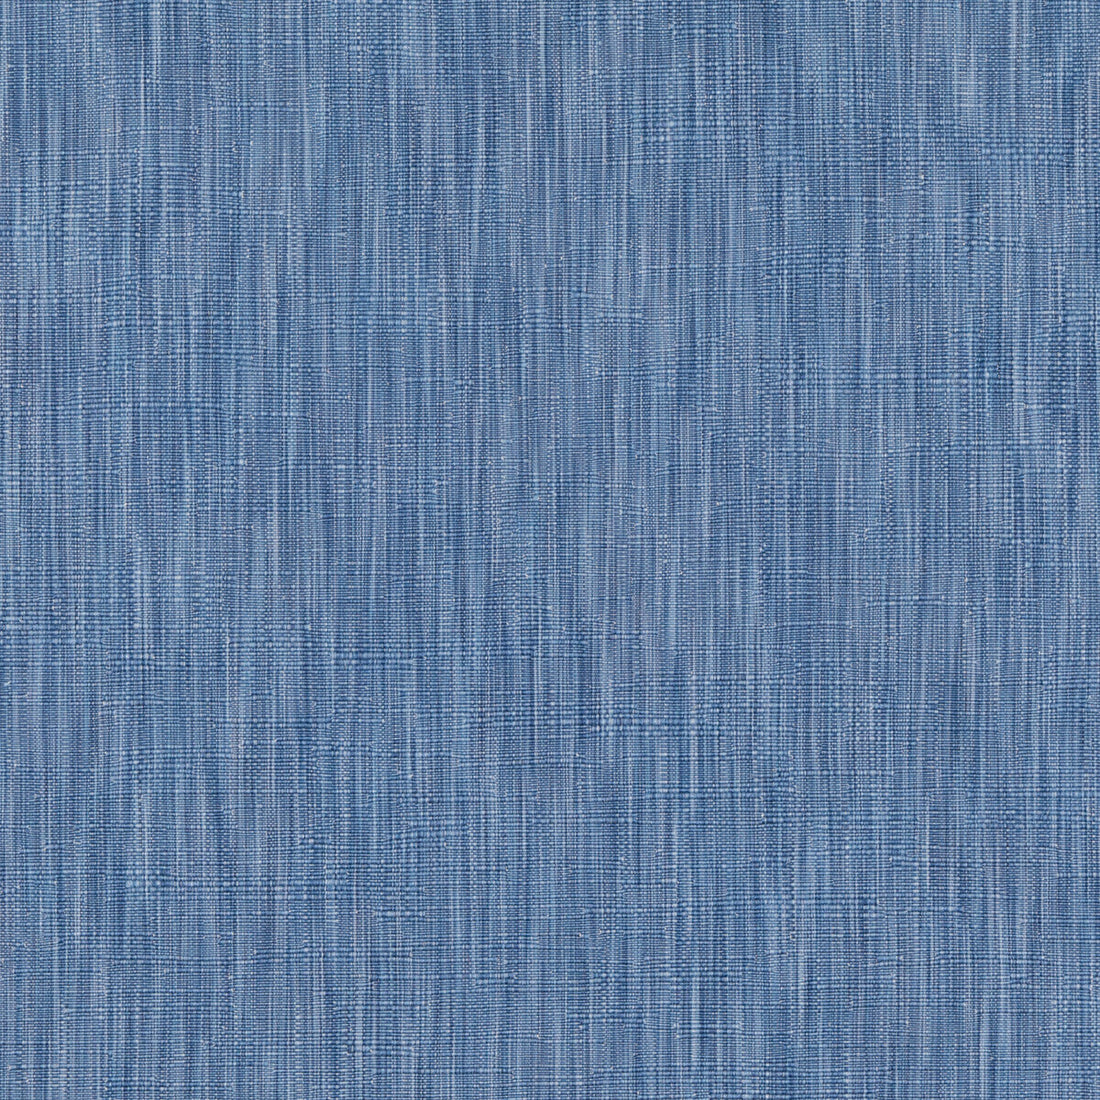 Saverne Texture fabric in blue color - pattern 8019122.5.0 - by Brunschwig &amp; Fils in the Alsace Weaves collection